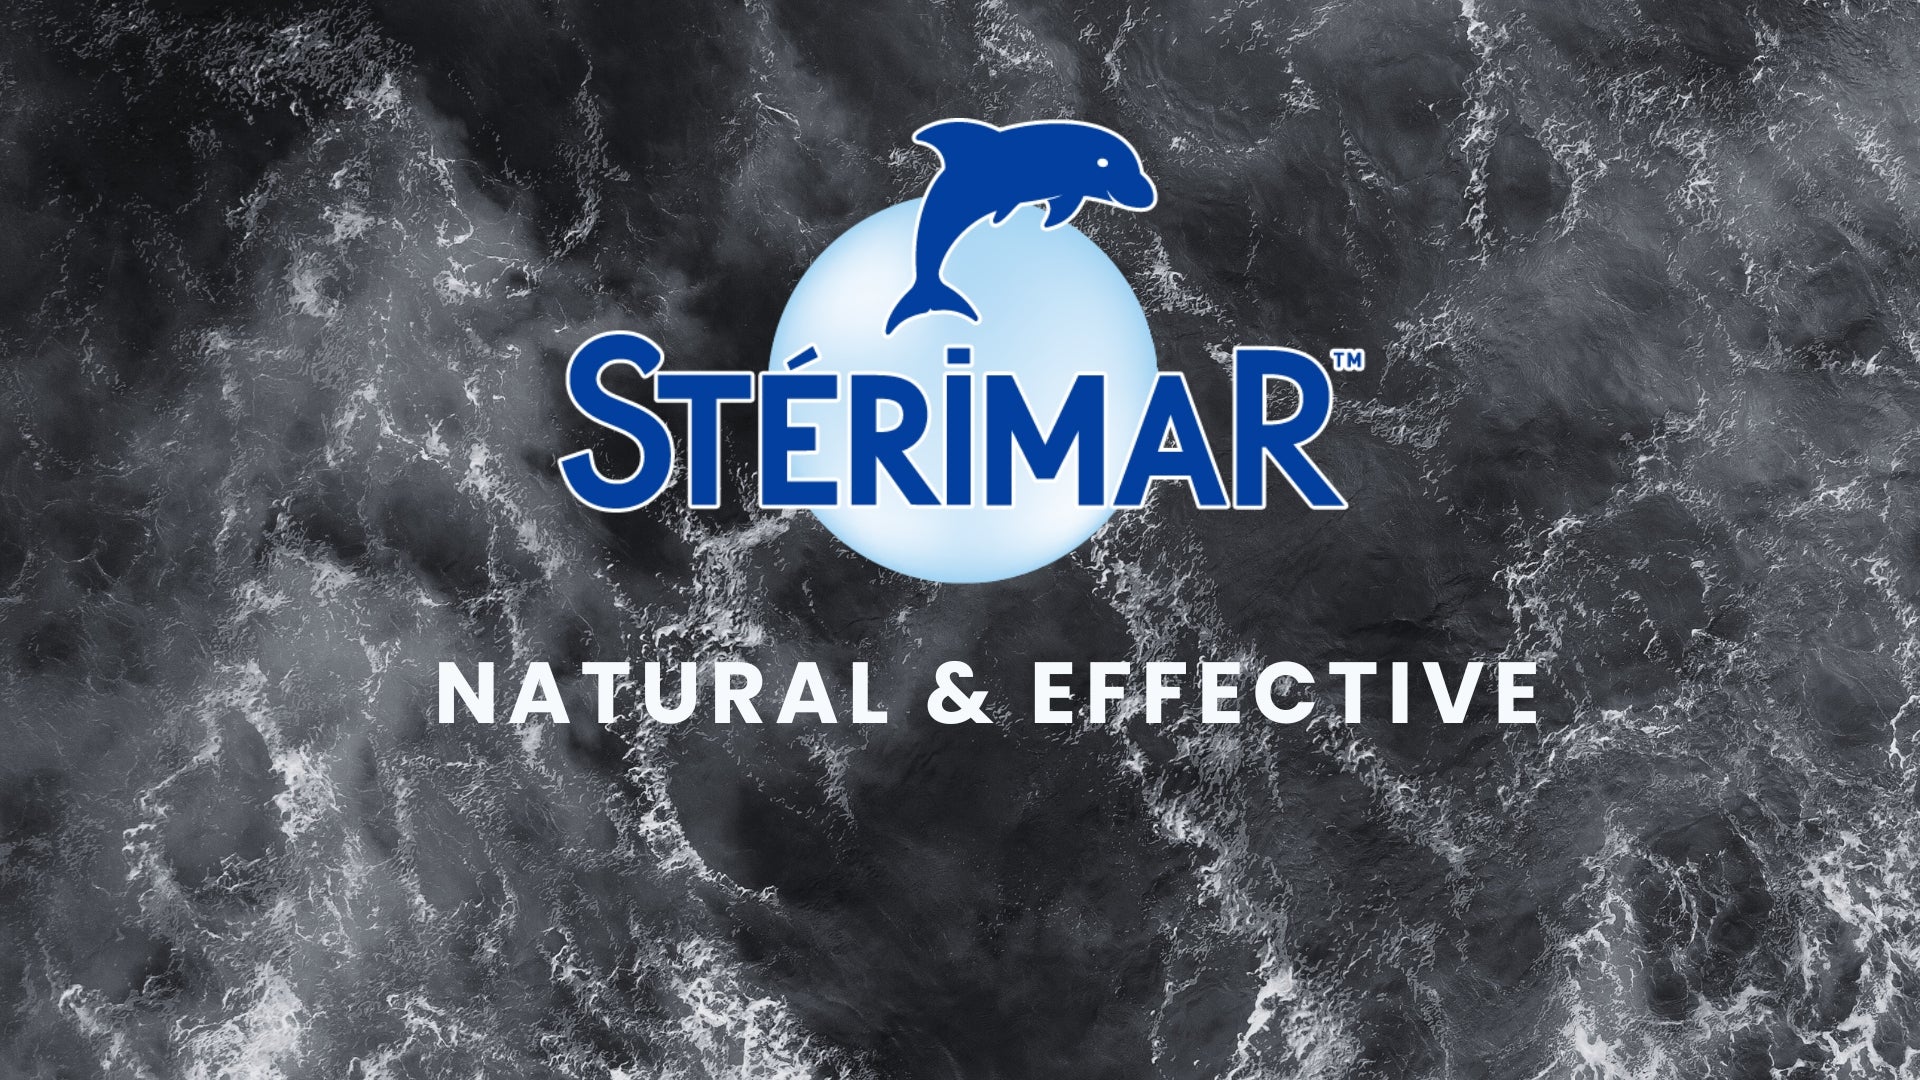 Load video: Introductory Video about Sterimar.